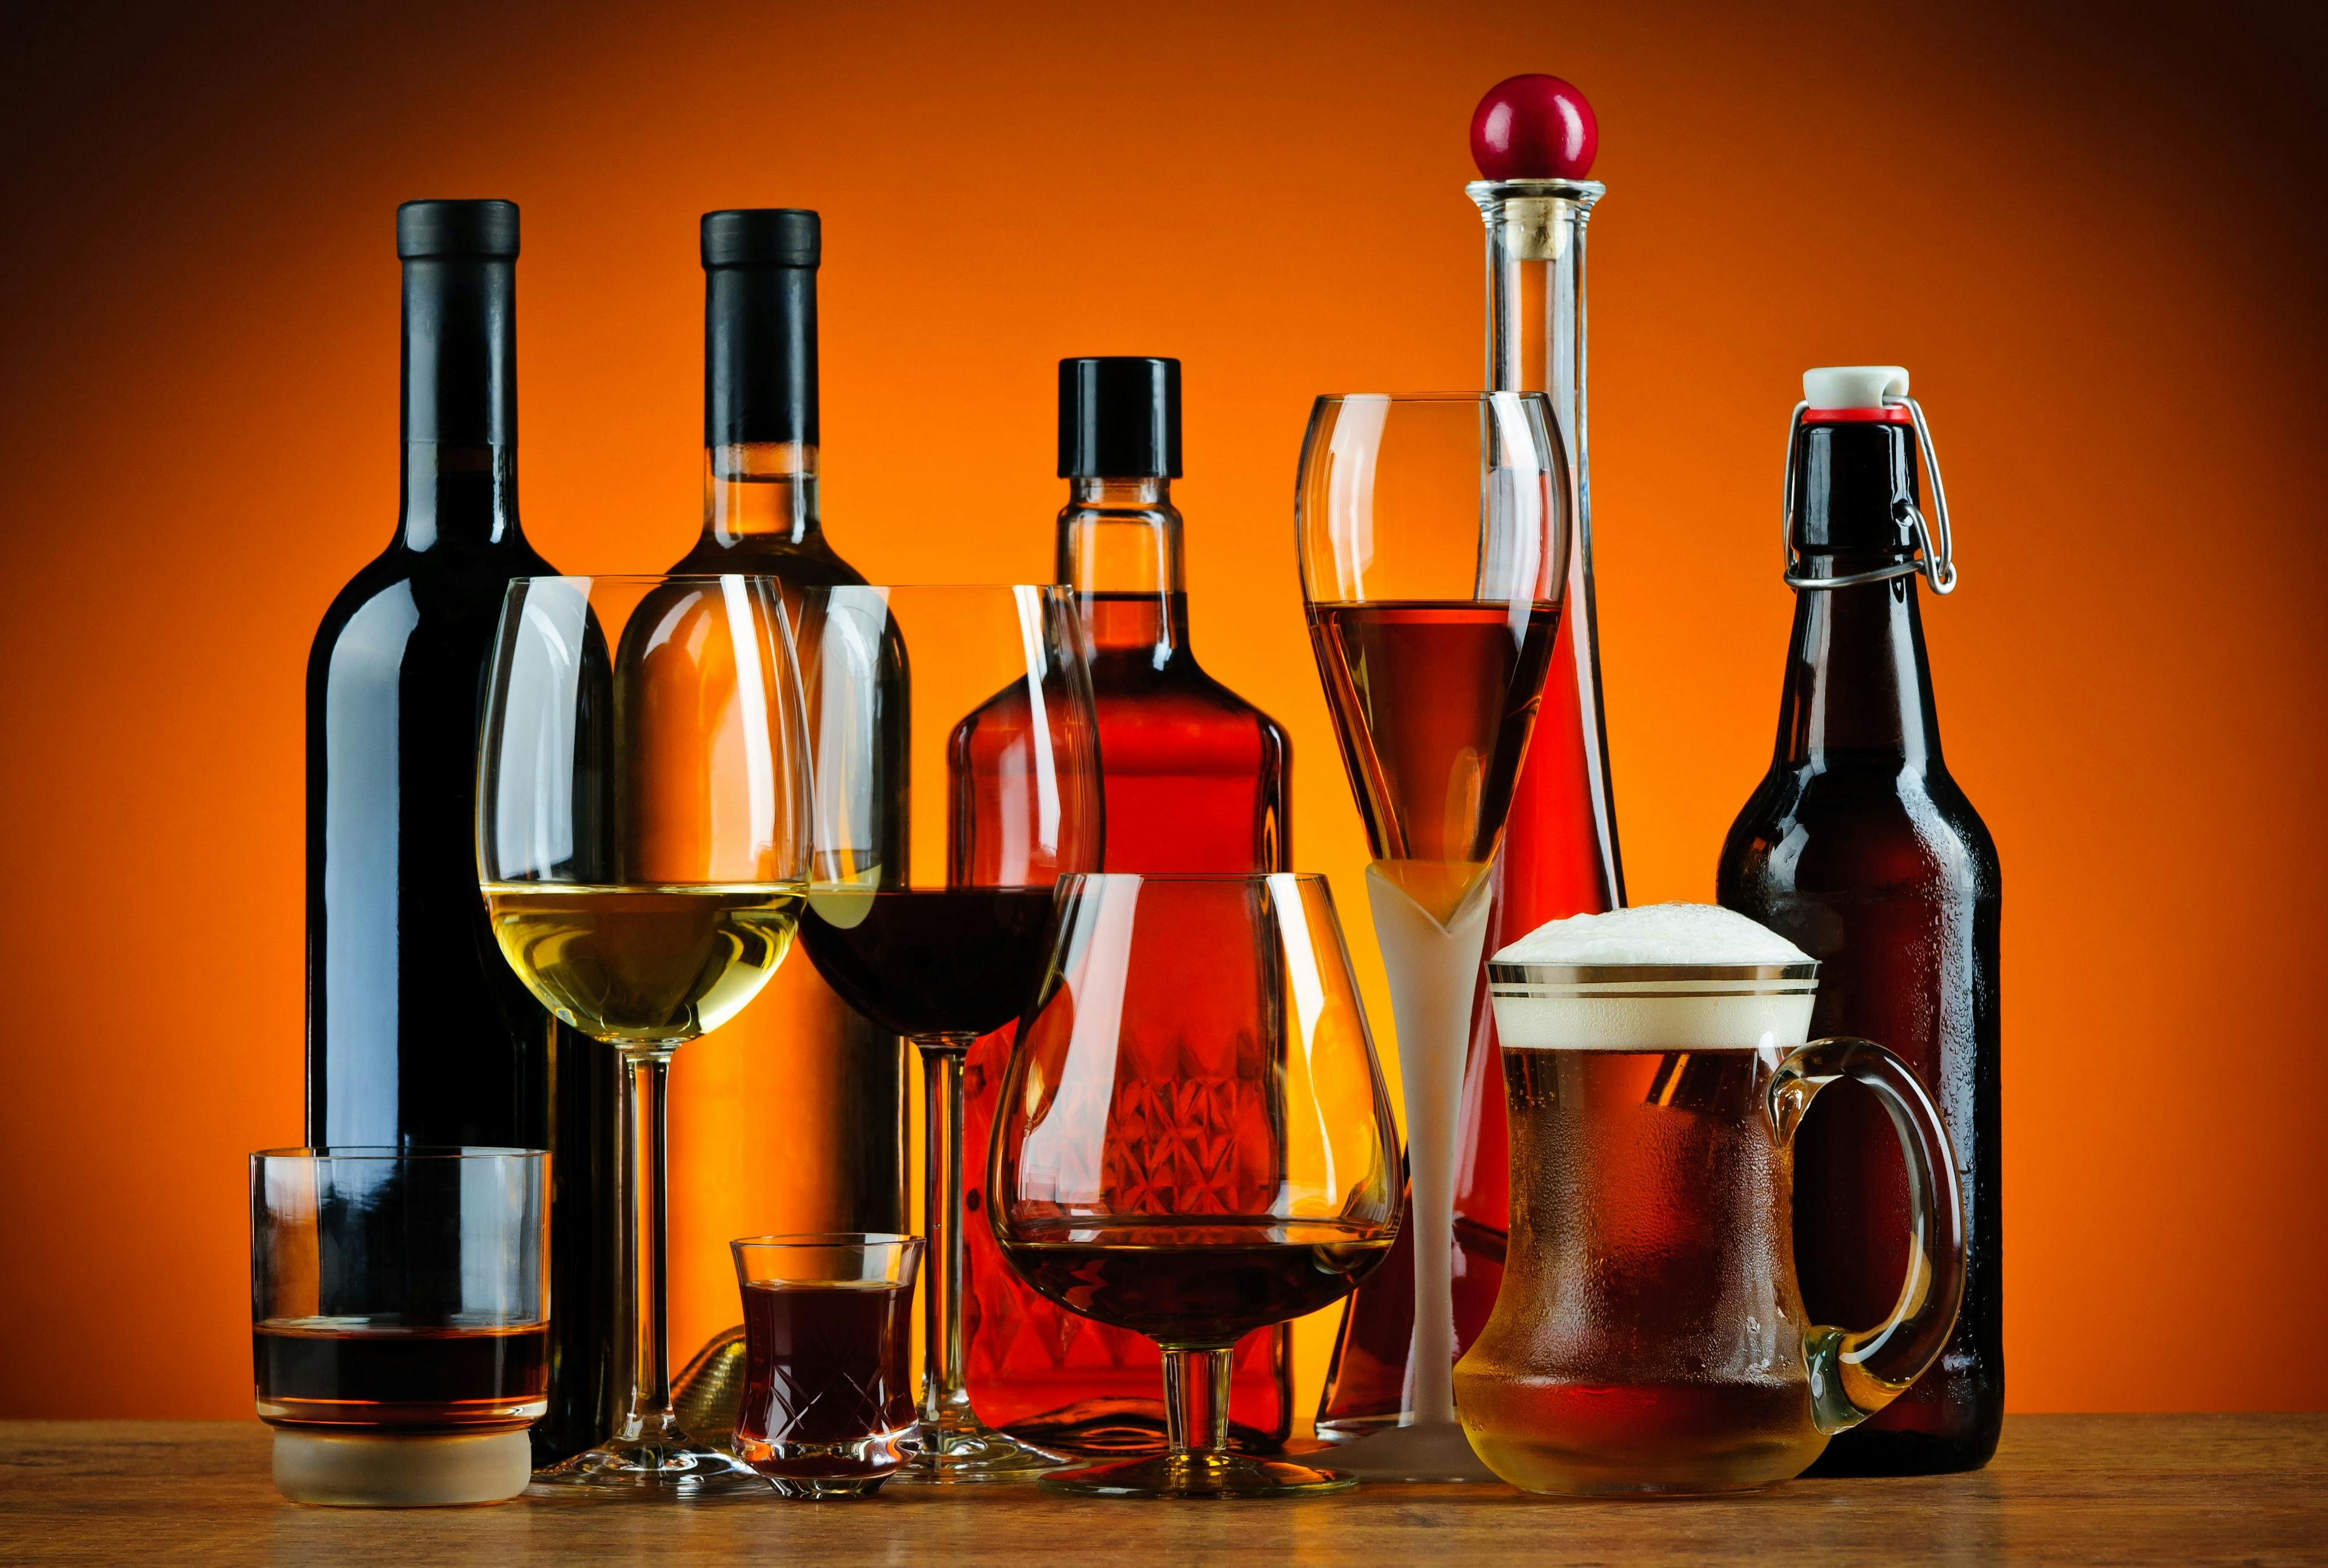 Bottles and glasses of alcohol drinks  | Image Credit: © draghicich - stock.adobe.com